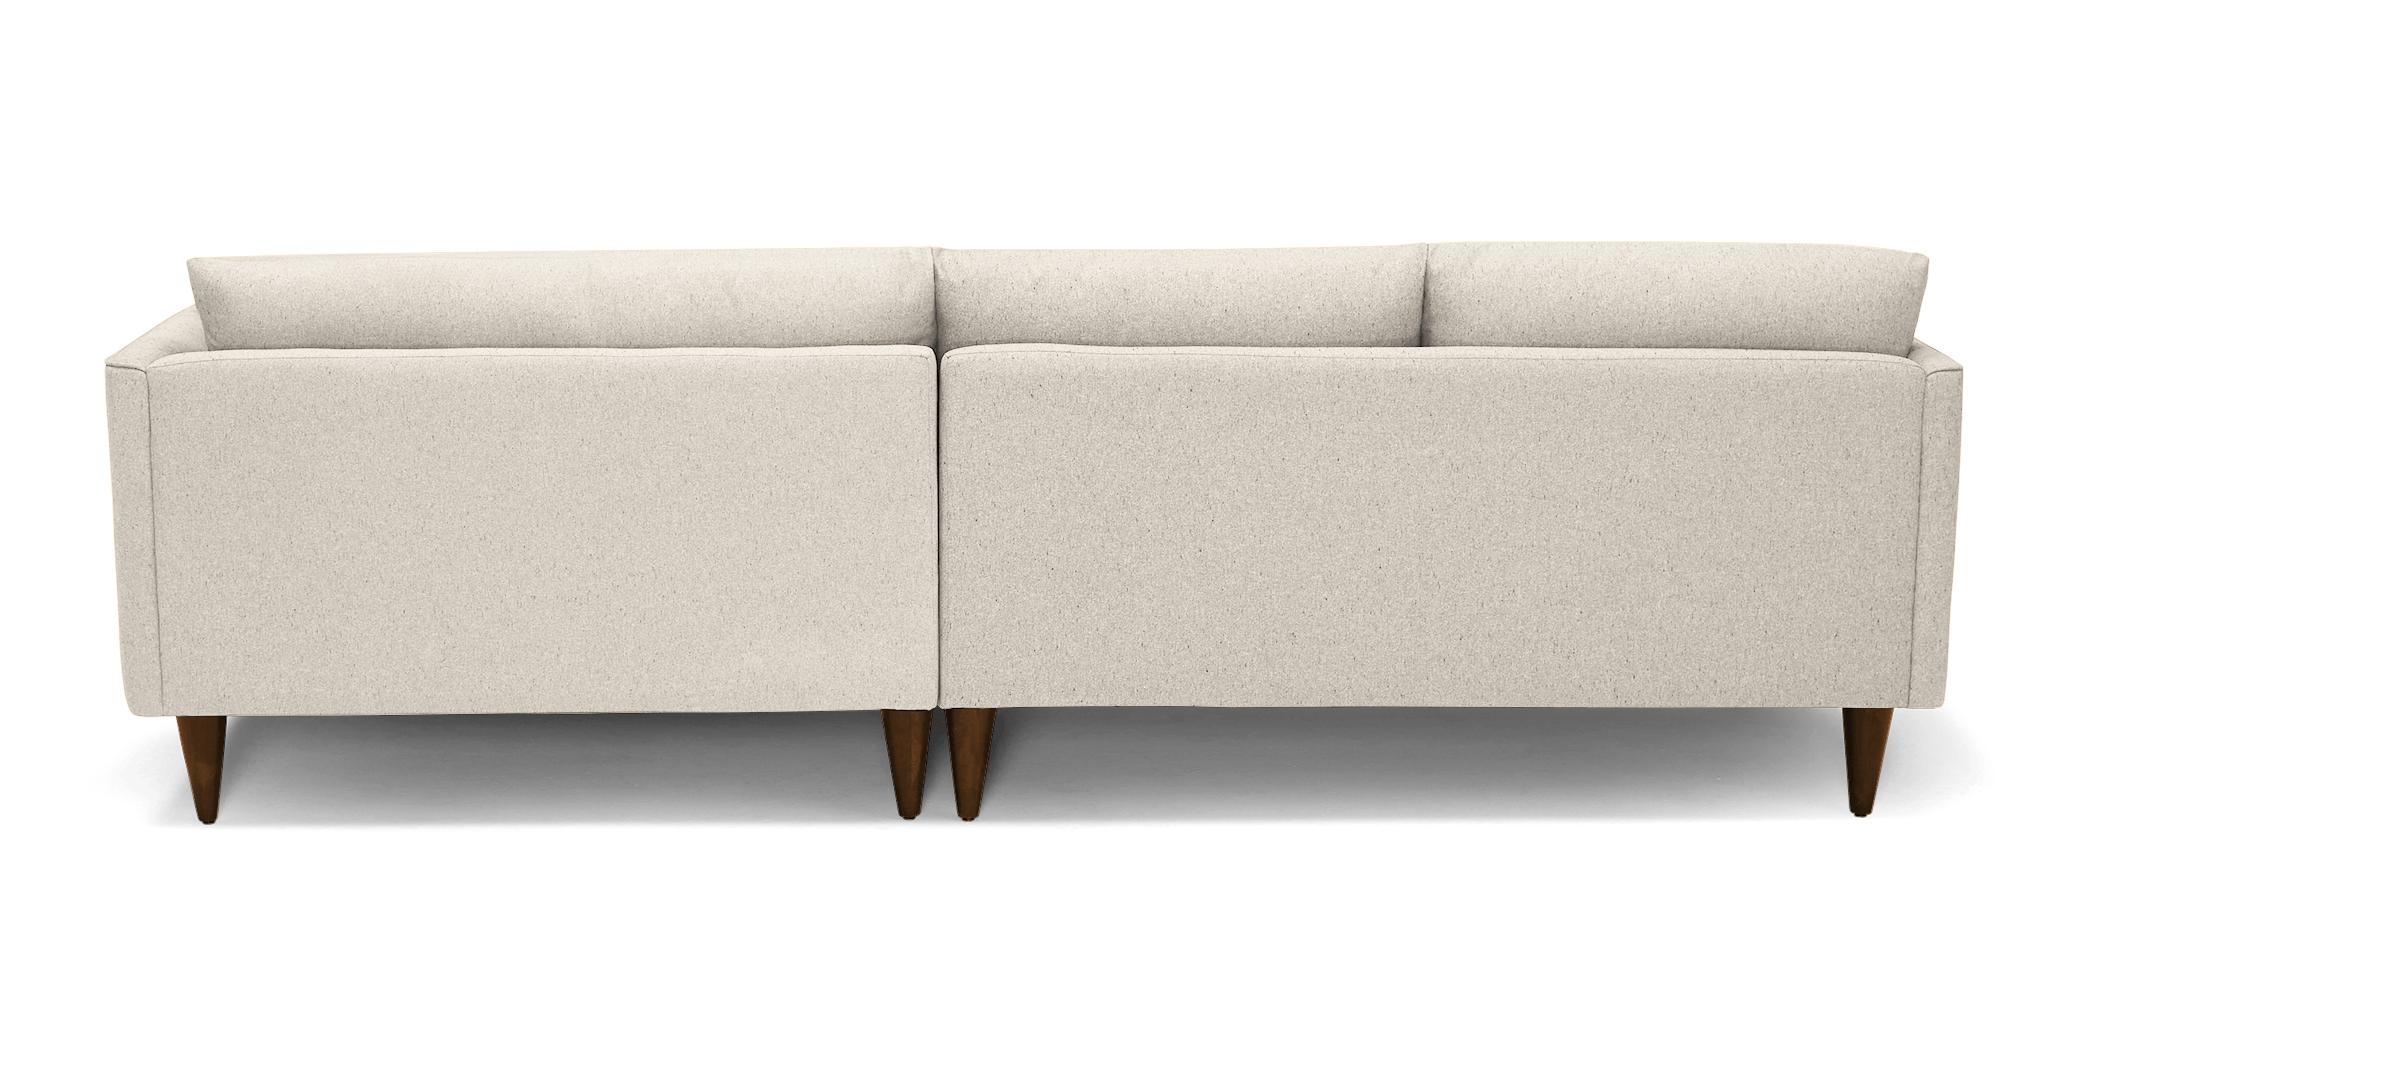 Beige/White Lewis Mid Century Modern Sectional - Cody Sandstone - Mocha - Right - Cone - Image 4